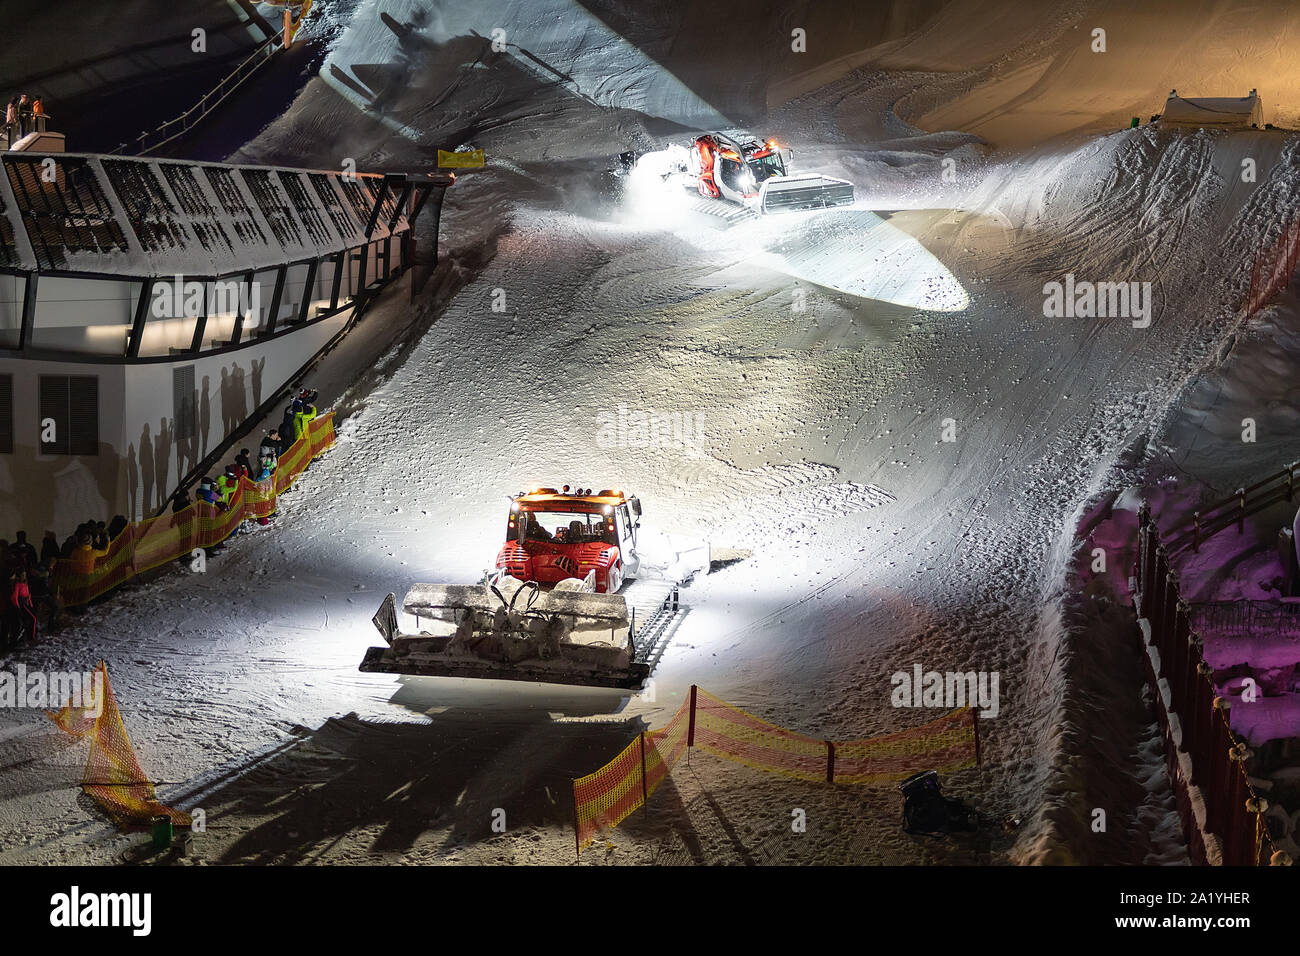 Two snowcat ratrack machines making night show performance on snow pister hill at alpine skiing resort Ischgl in Austria Stock Photo